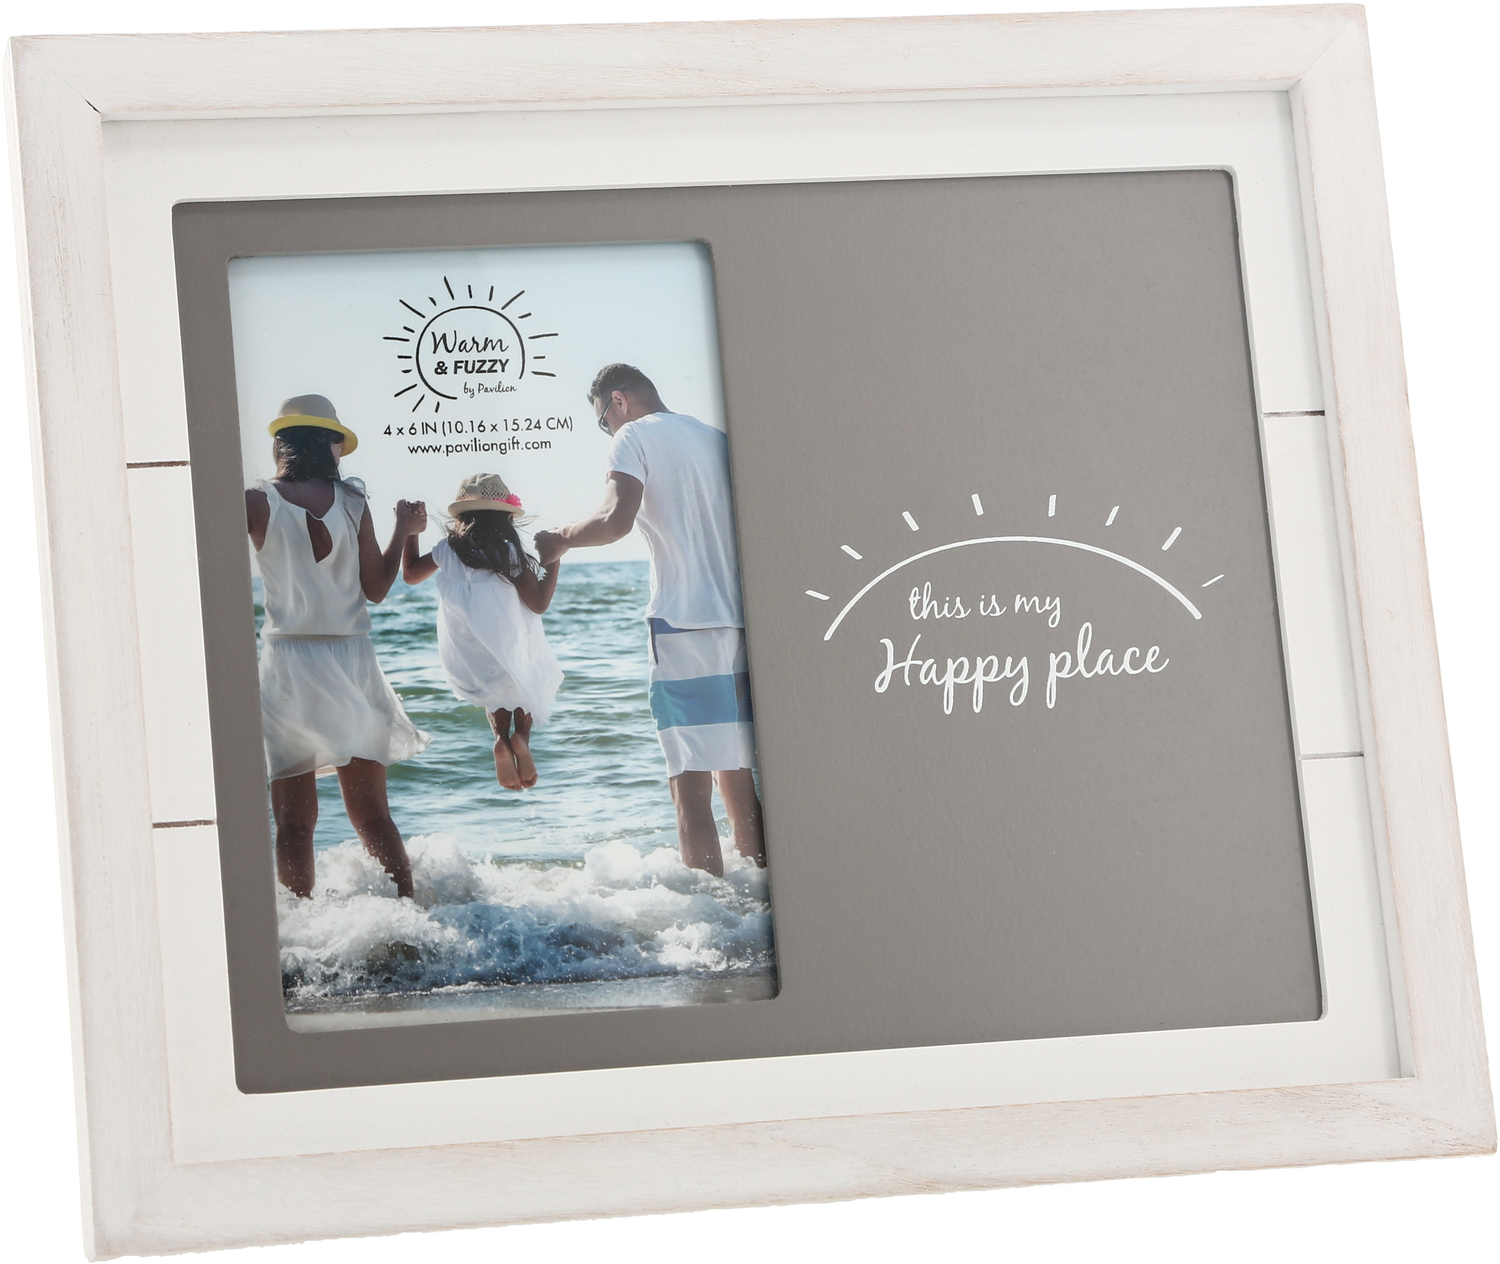 Happy Place by Warm and Fuzzy - Happy Place - 10" x 8.5" Frame (Holds 4" x 6" Photo)